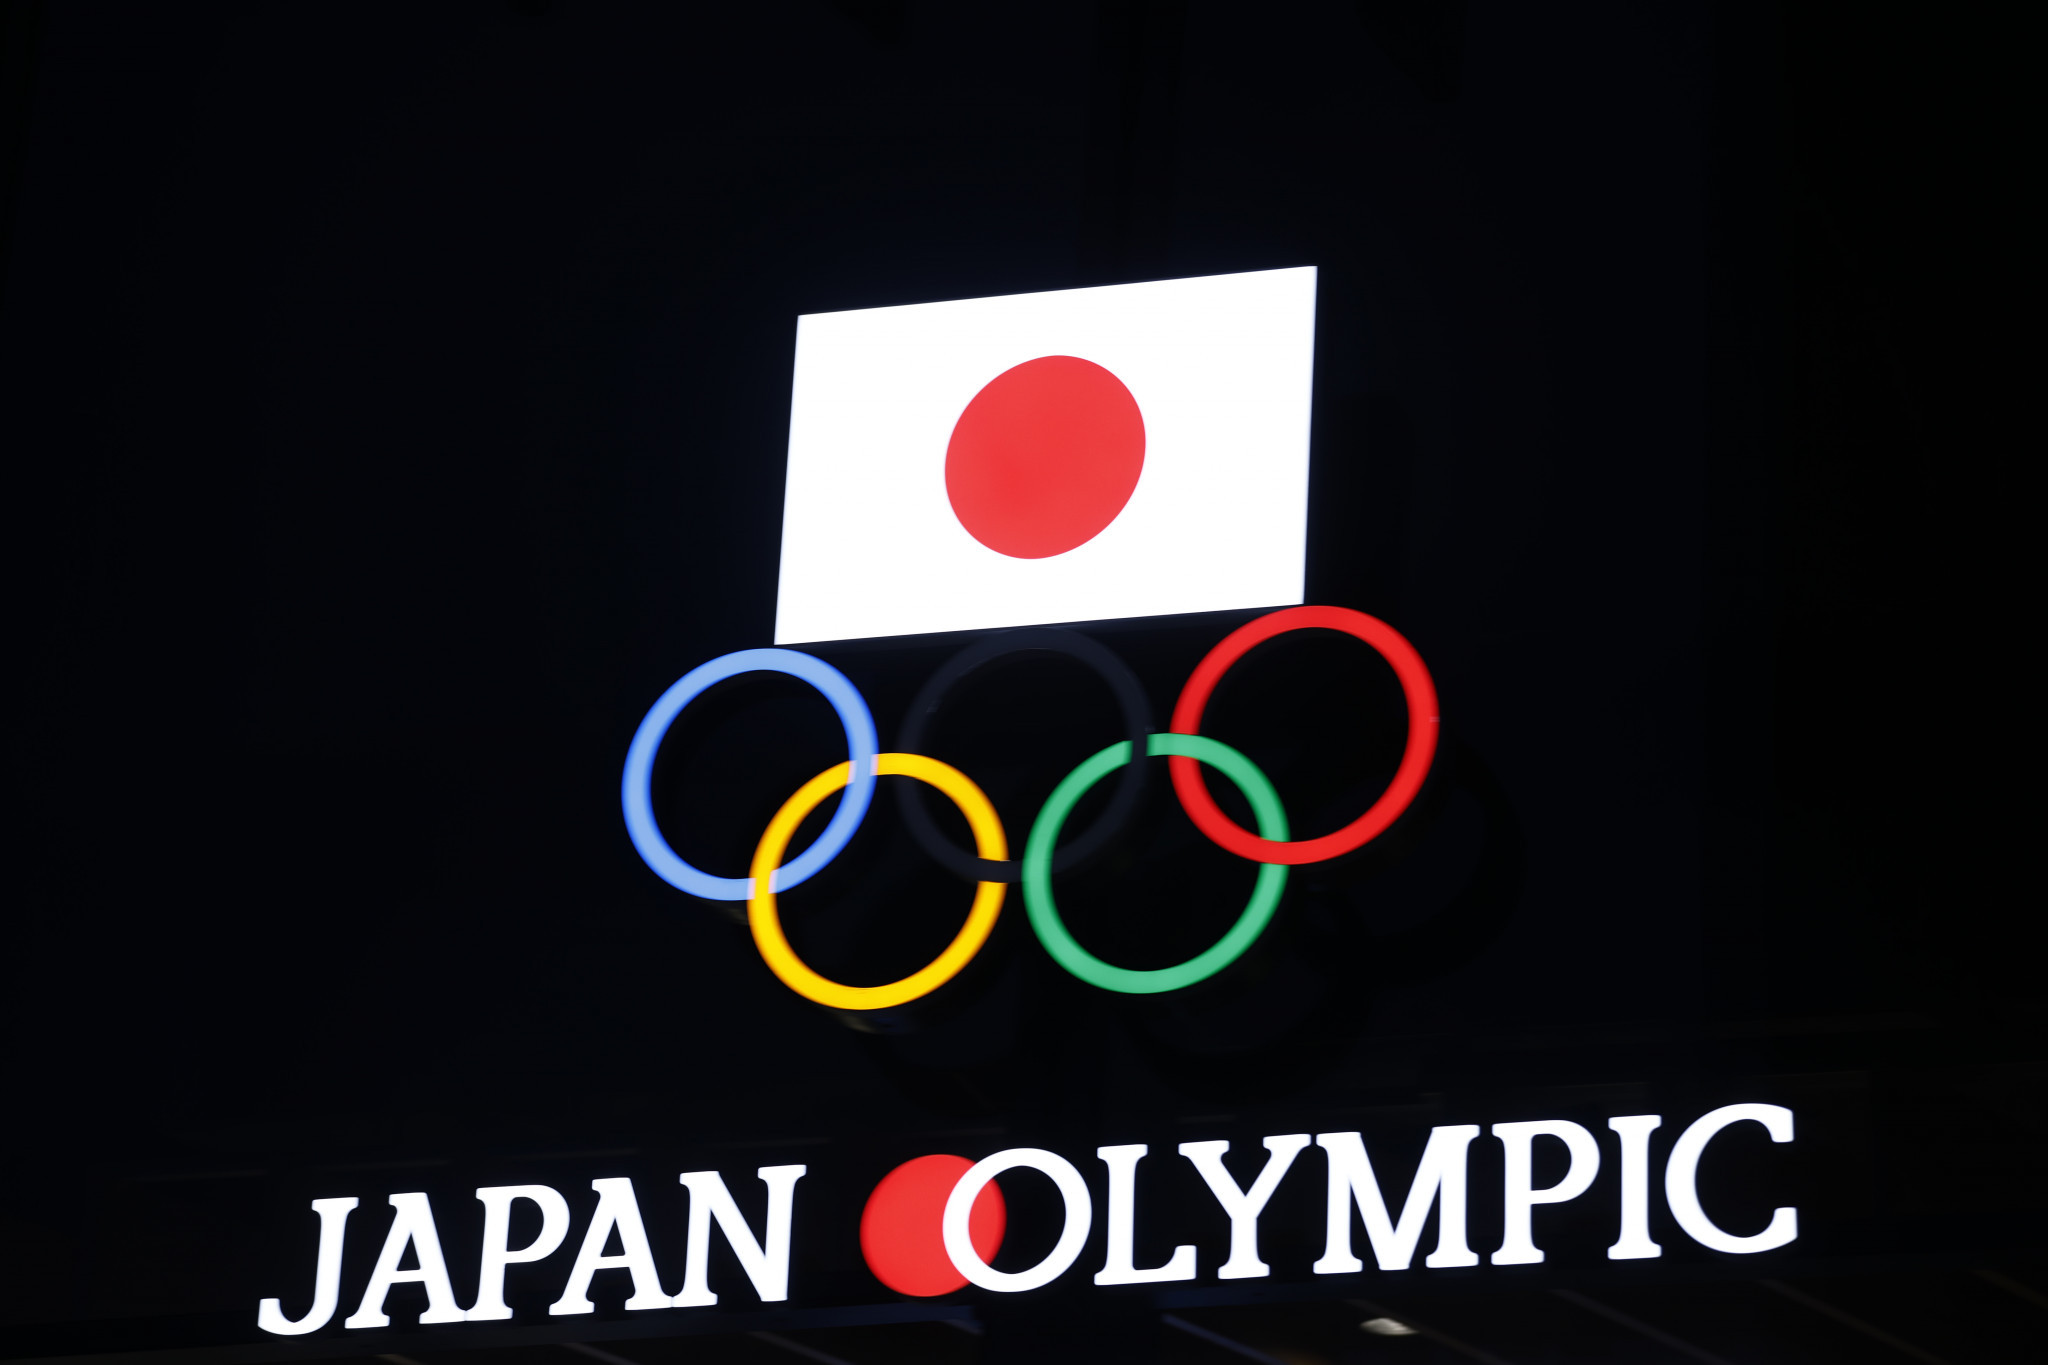 Japan is preparing to host the Asian Games in Aichi-Nagoya in 2026 ©Getty Images